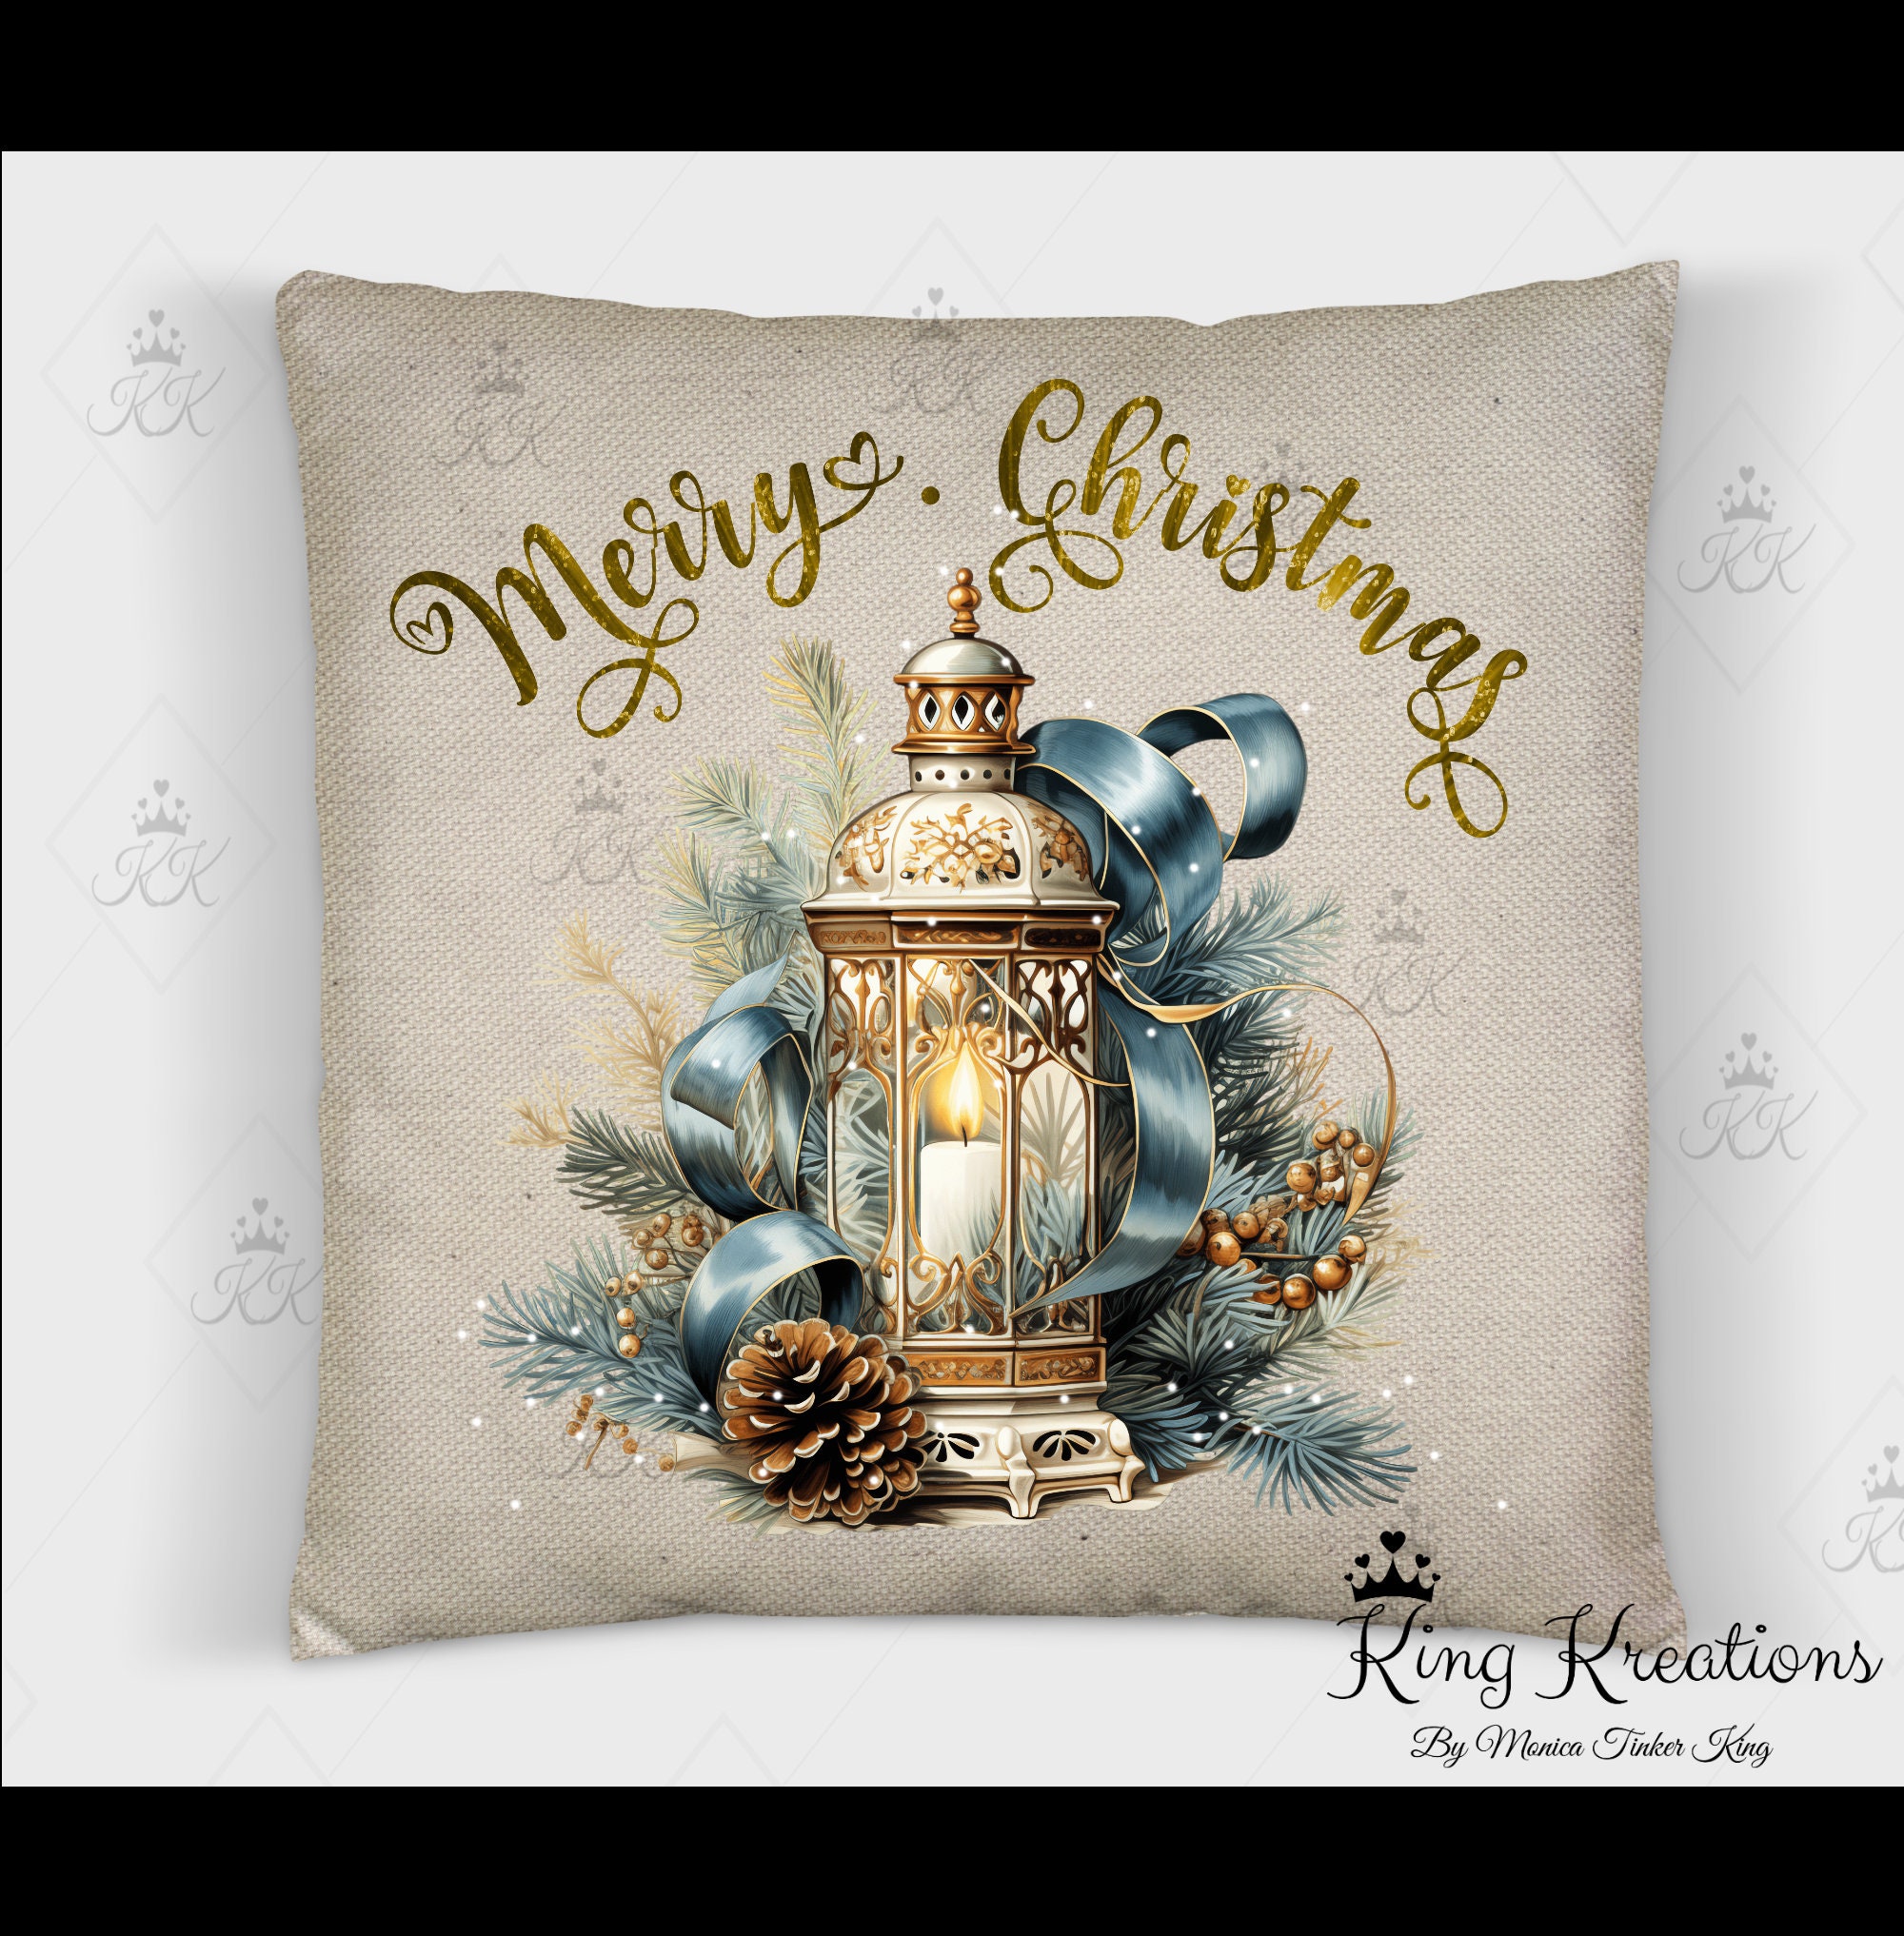  Outdoor Waterproof Pillows with Inserts 20x12In,Christmas Cute  Gnome with Xmas Tree Throw Pillow Cushion Case,Winter Snowflake on Blue  Decor Pillows for Patio Furniture Garden Balcony Couch Sofa : Patio, Lawn 